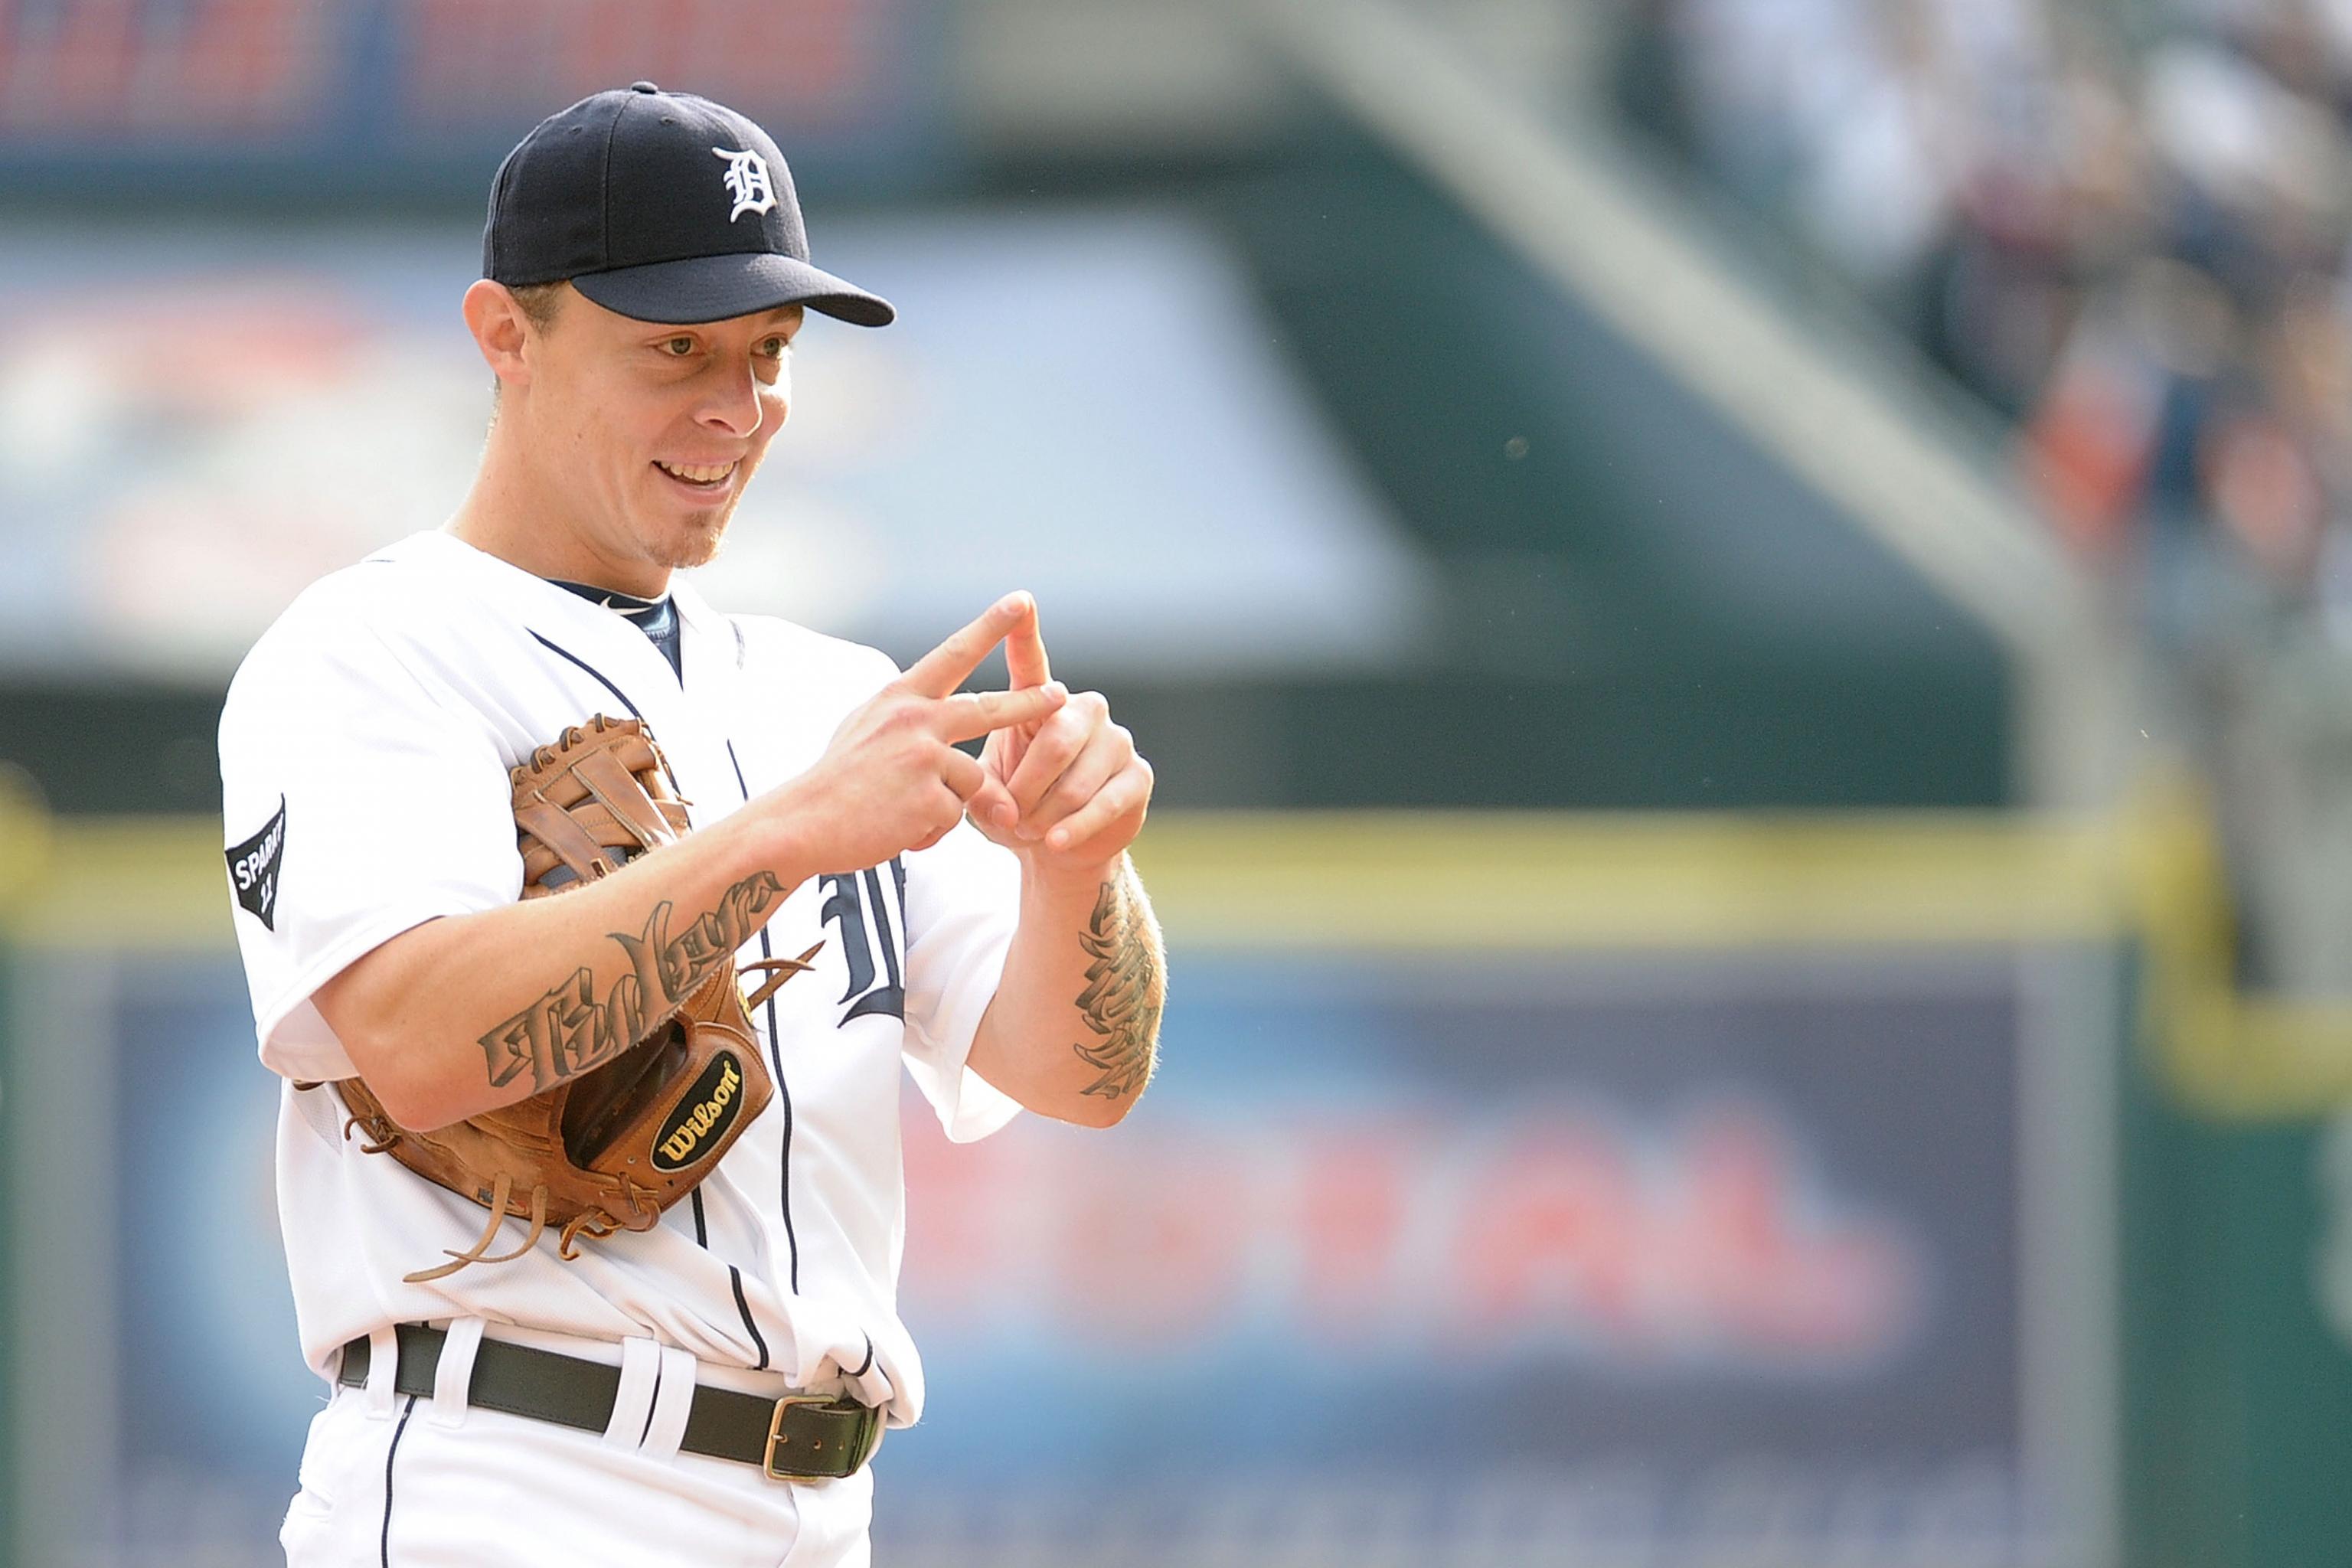 Tigers' Brandon Inge signs two-year, $11.5 million contract